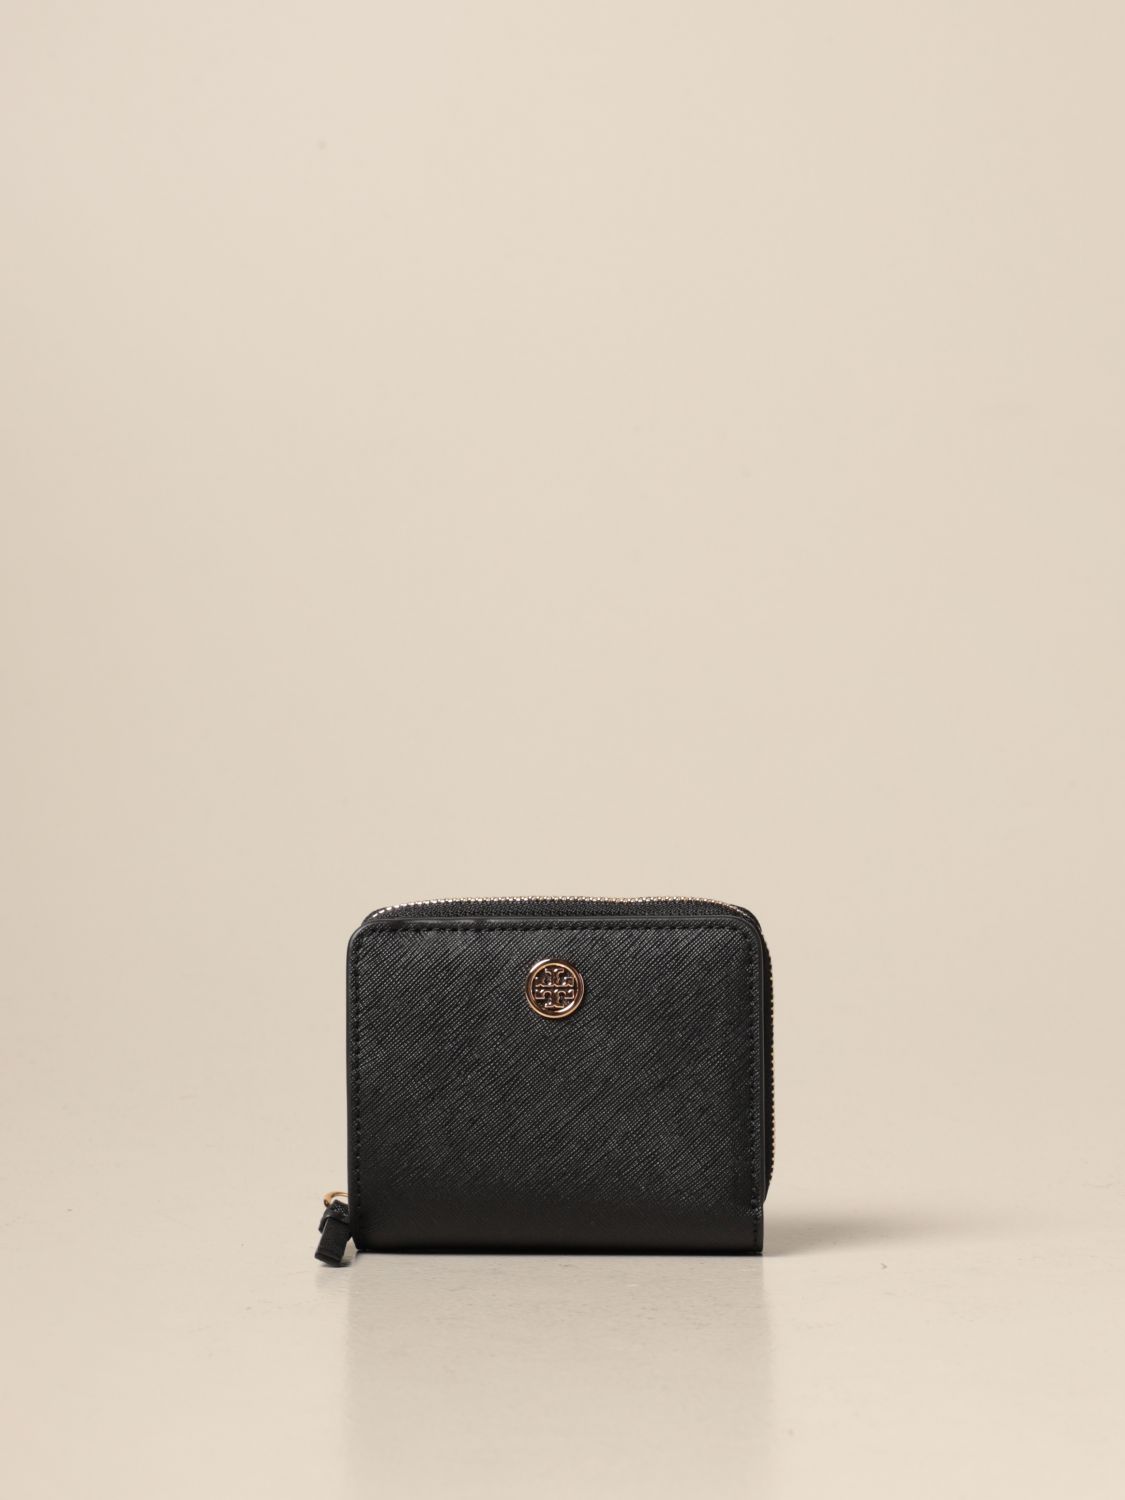 Tory Burch Outlet: wallet in leather with metallic emblem - Black | Tory  Burch mini bag 56621 online on 